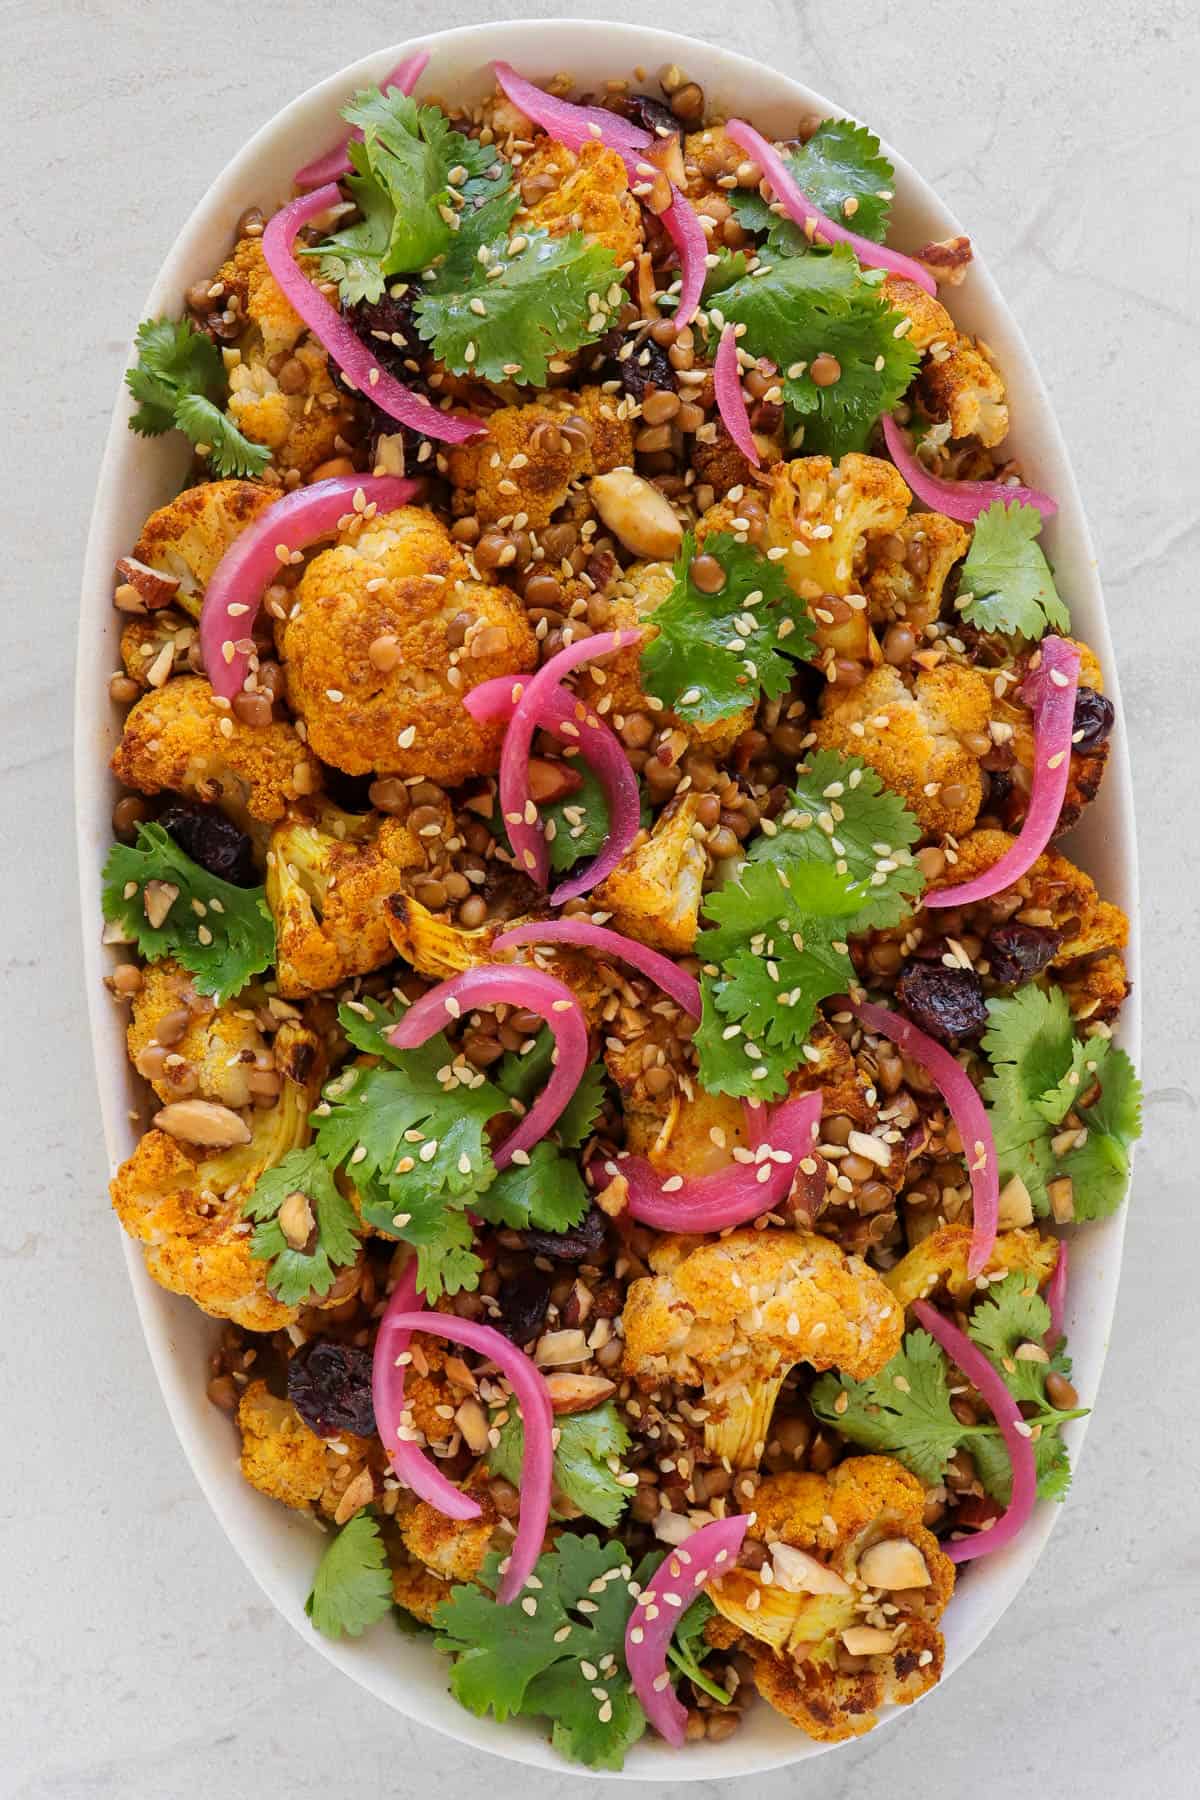 Roasted cauliflower on a plate with coriander leaves, pickled onions, lentils, dried cranberries and toasted sesame seeds.